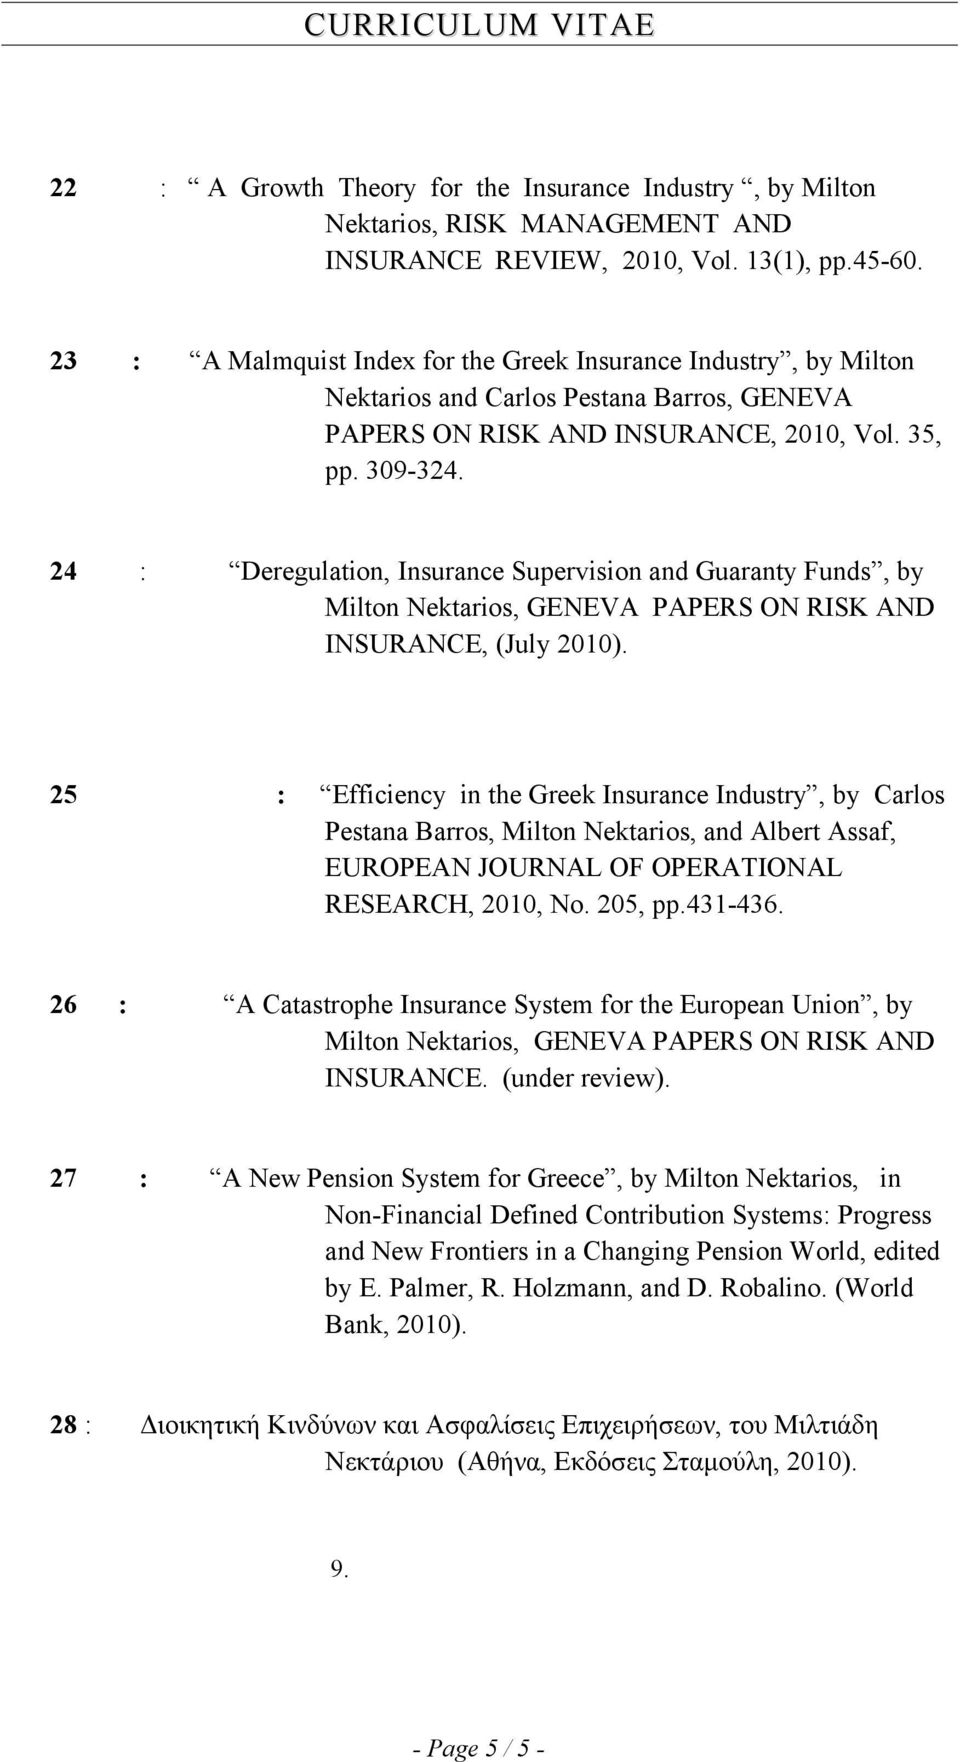 24 : Deregulation, Insurance Supervision and Guaranty Funds, by Milton Nektarios, GENEVA PAPERS ON RISK AND INSURANCE, (July 2010).